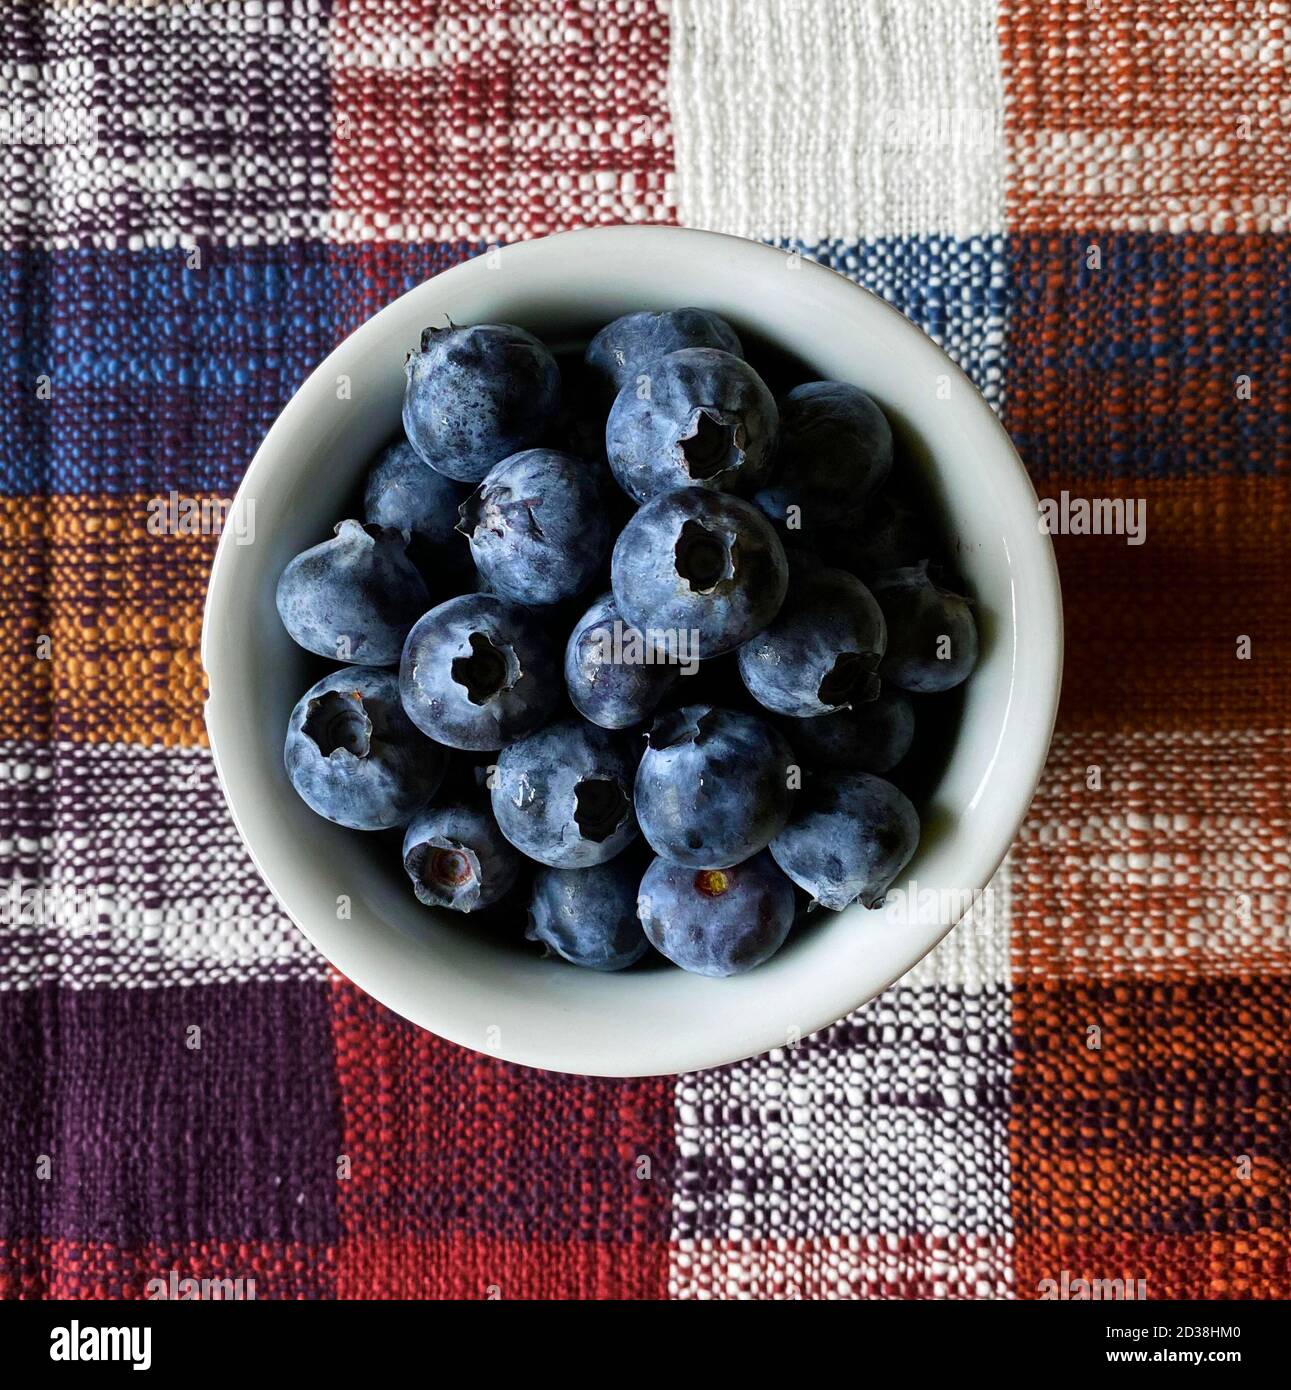 fresh blueberries in a bowl over a fall tablecloth Stock Photo